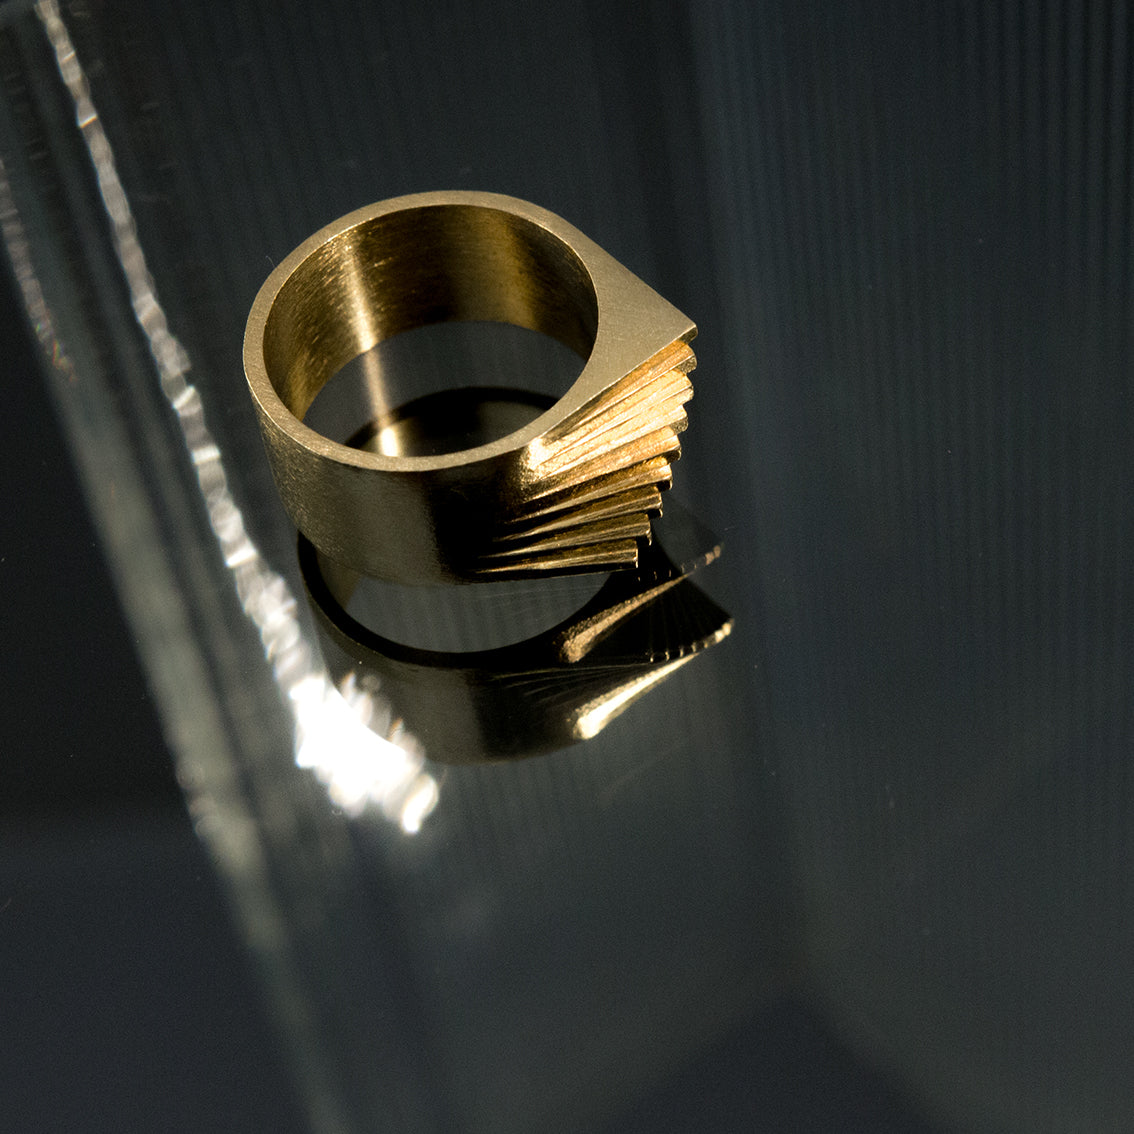 A photo of an attention grabbing brushed brass ring laying on a black tinted mirror. The reflection of the ring and ribbed glass is visible on the mirror. The photo has dimmed lighting and the ring has a low glow. The ring seems to be made of layers rotating on the same axes. It has a pointy top edge which seems like spiral stairs. The rhythm of the layers of the ring is the focus of the photo. The photo has sexy elements because of shapes, reflections, colour and dimmed lighting. 